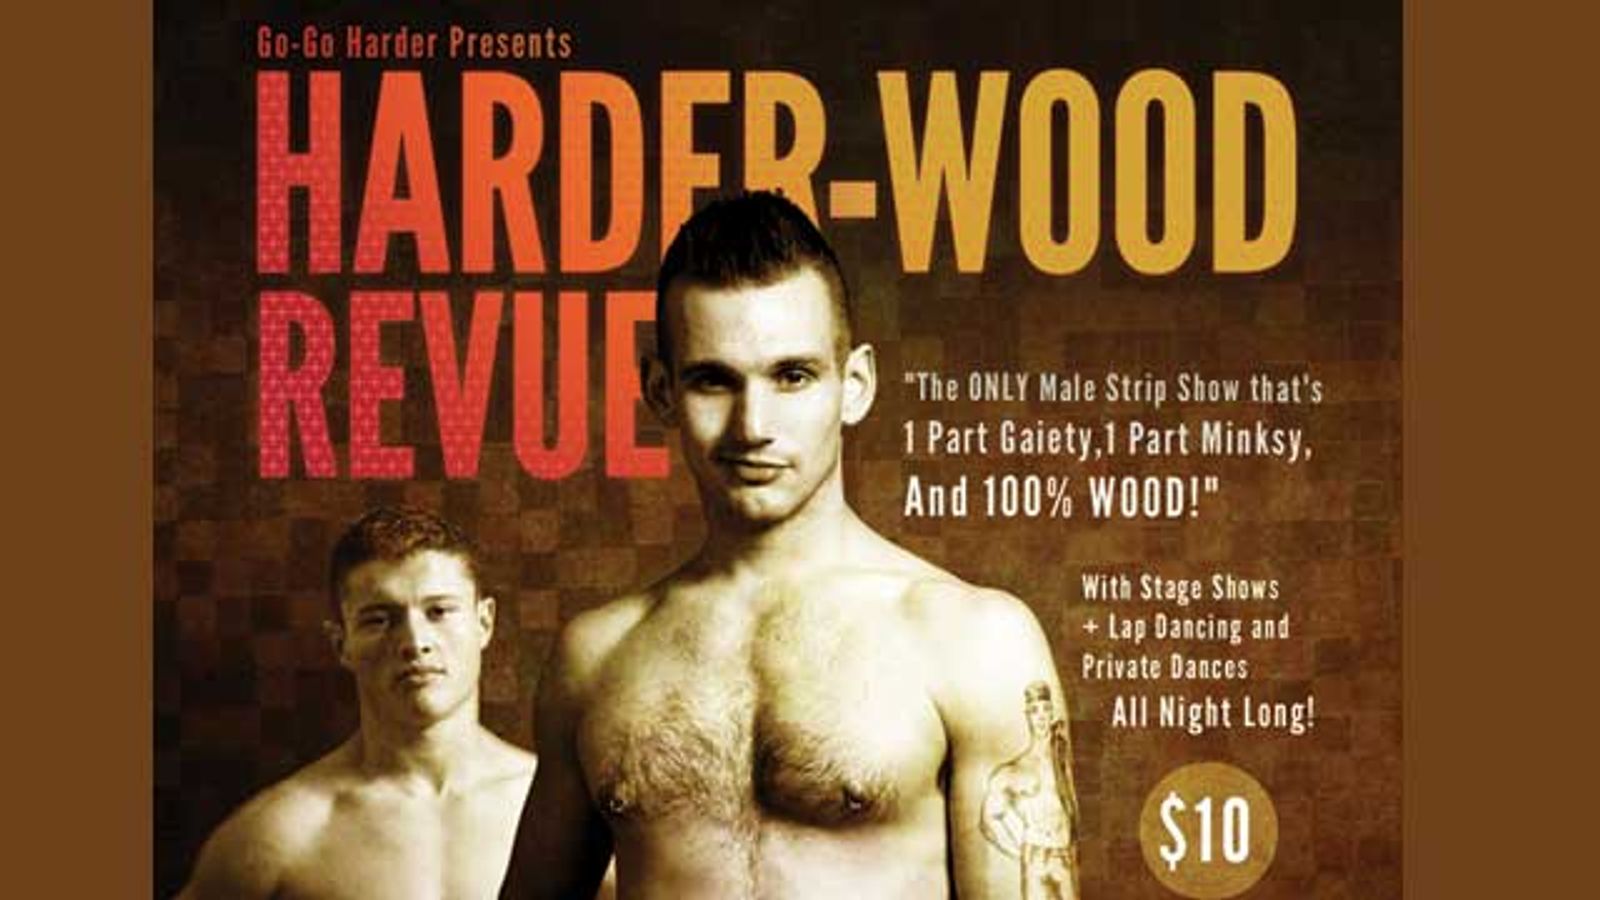 Go-Go Harder's “The HARDER-Wood Revue” at Headquarters, Aug 4